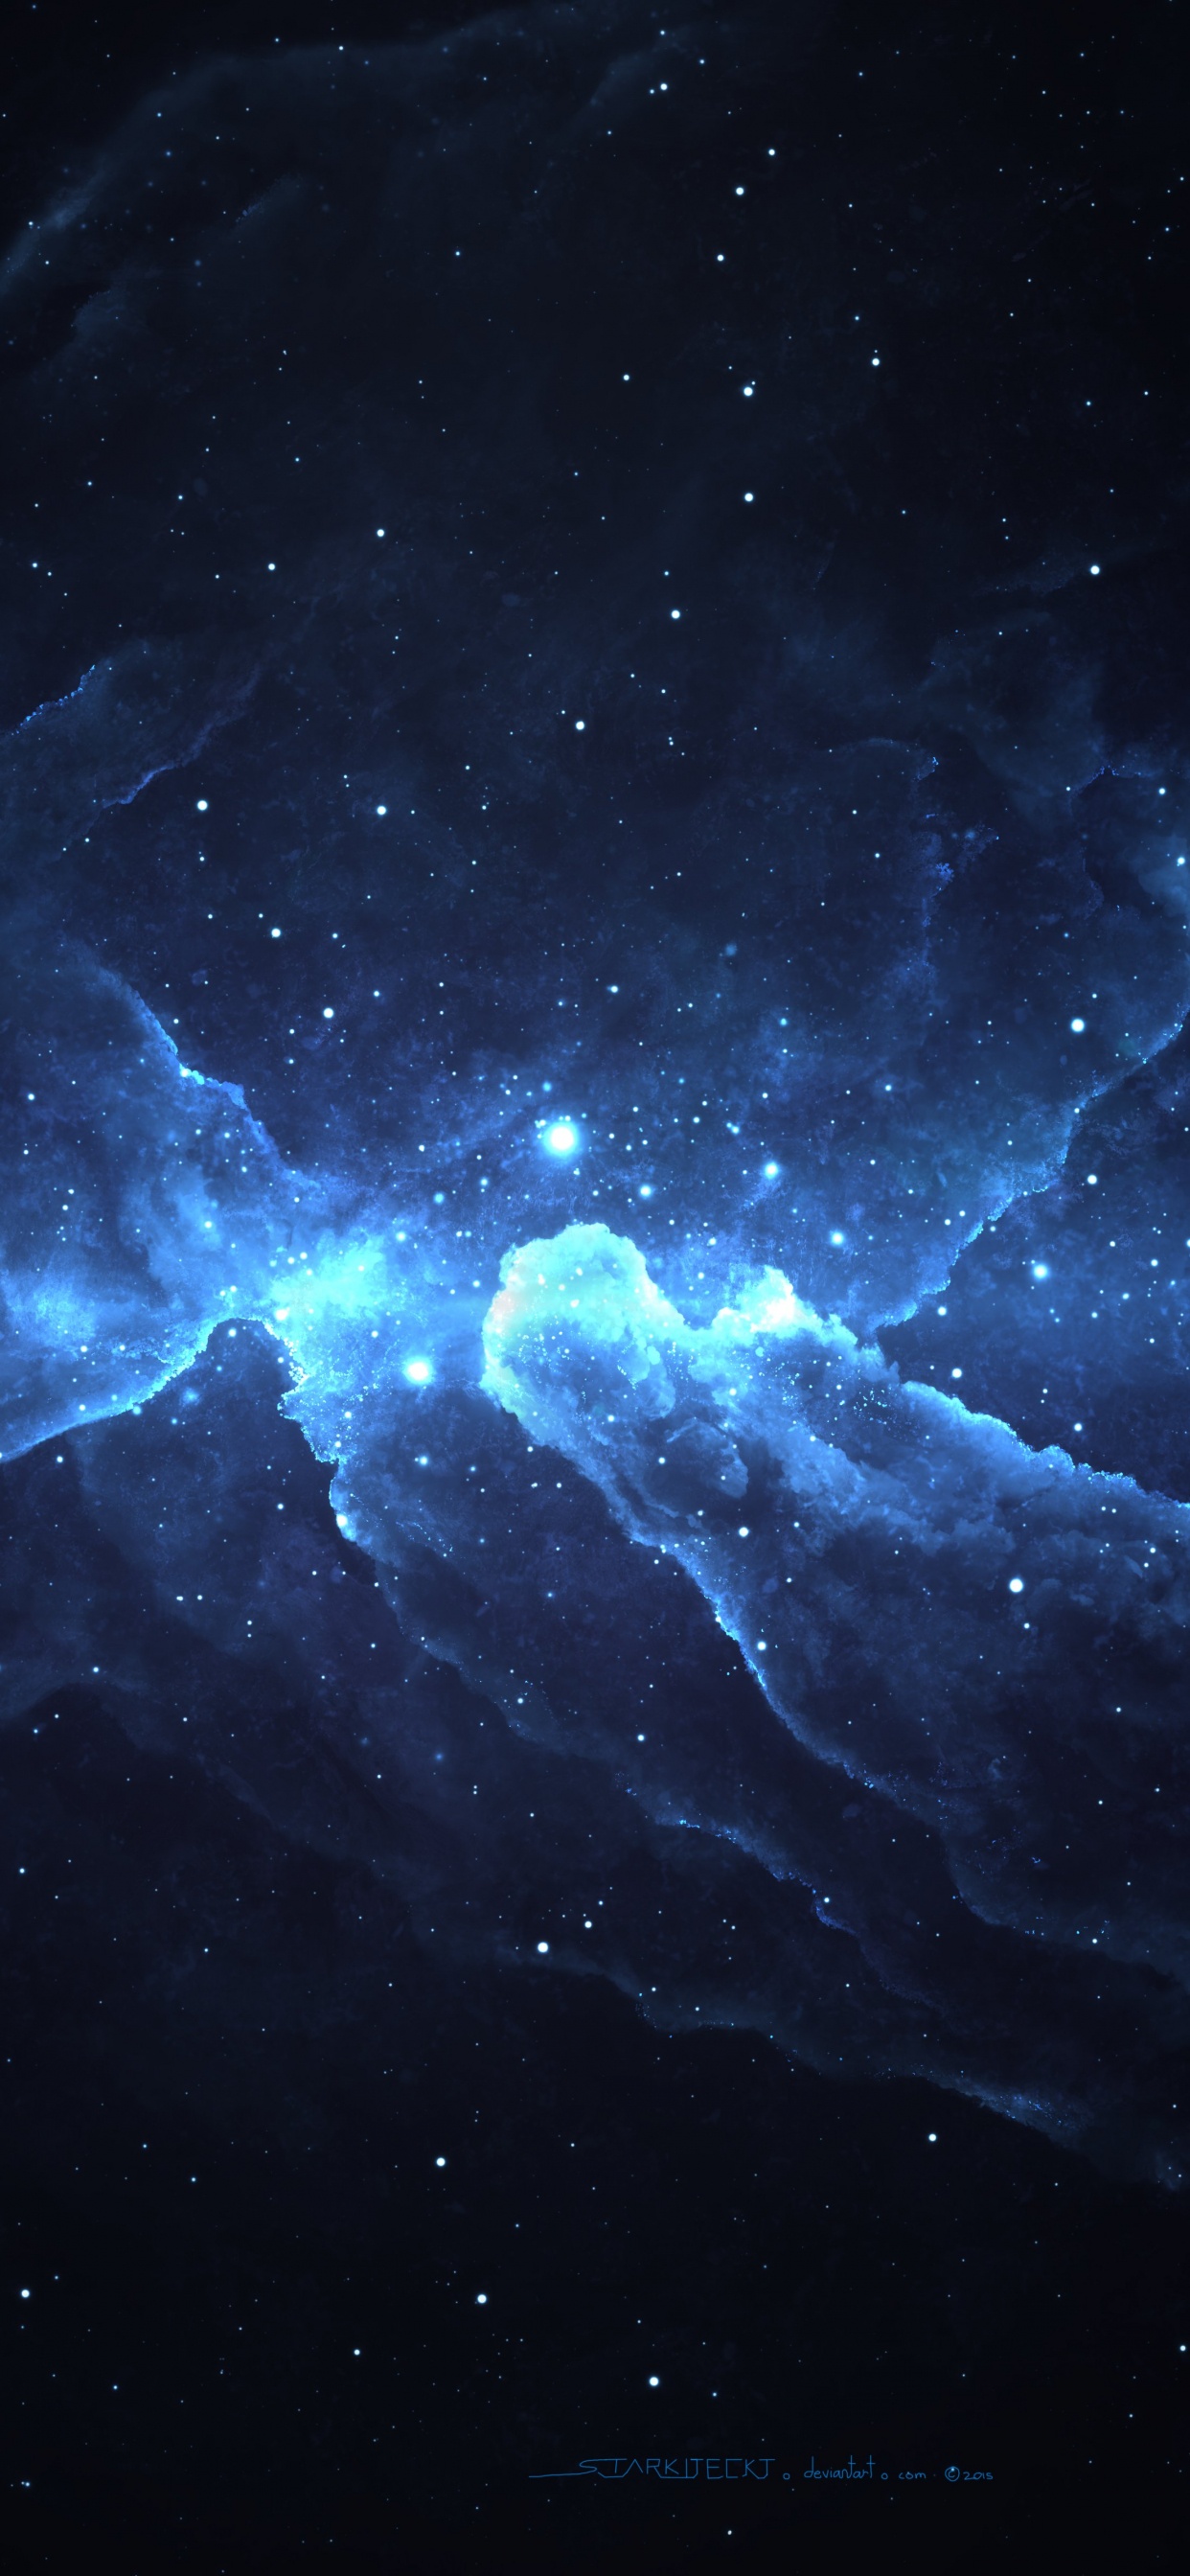 White and Blue Galaxy Illustration. Wallpaper in 1242x2688 Resolution